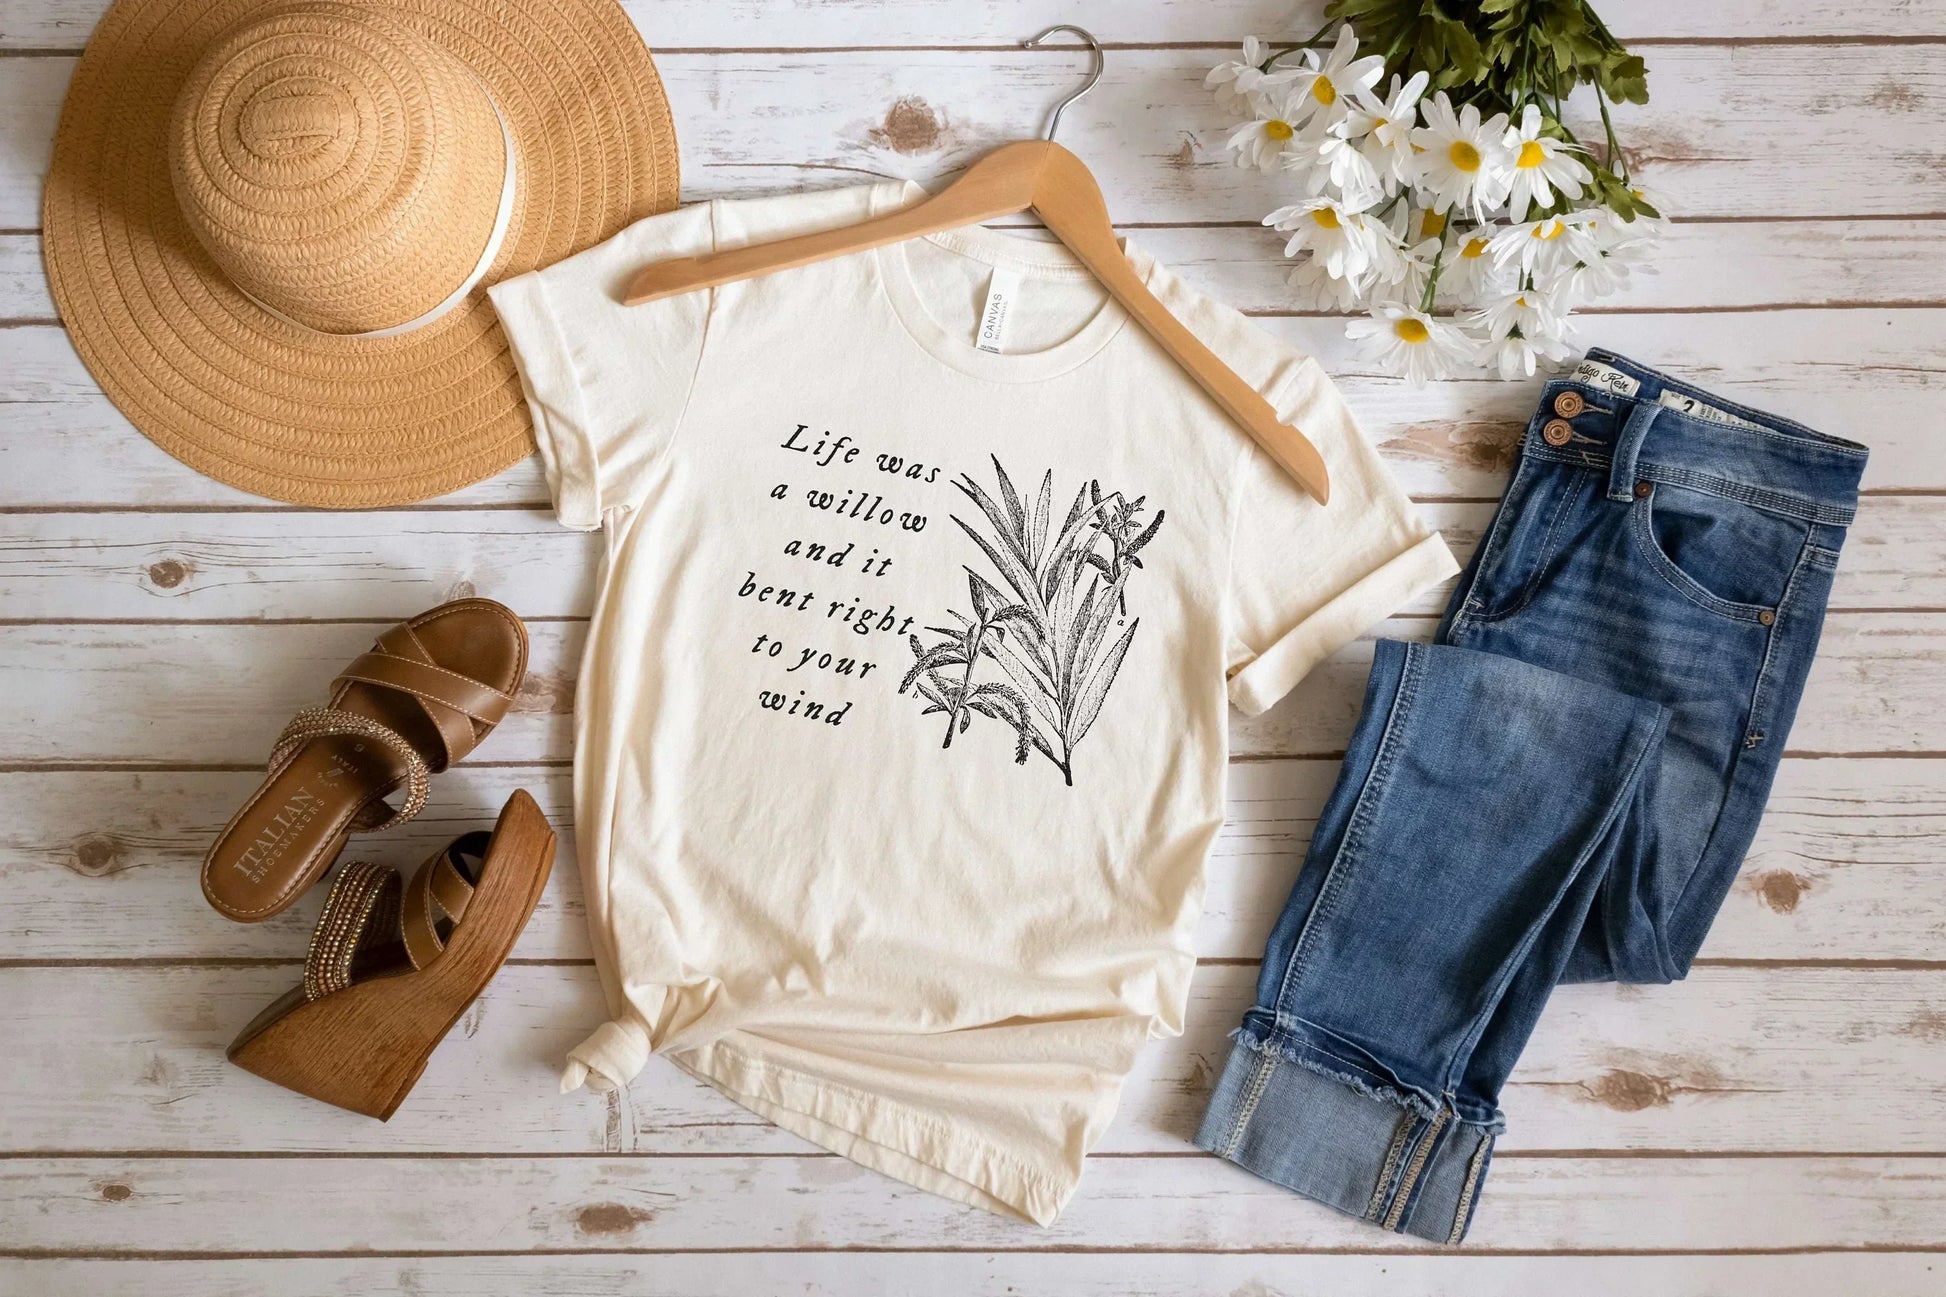 Willow Tree, Taylor Swift shirt, Forklore Merch, Evermore sweatshirt, Taylorswift sweatshirt, Lover Merch, Swiftie merch, Taylor swift gift